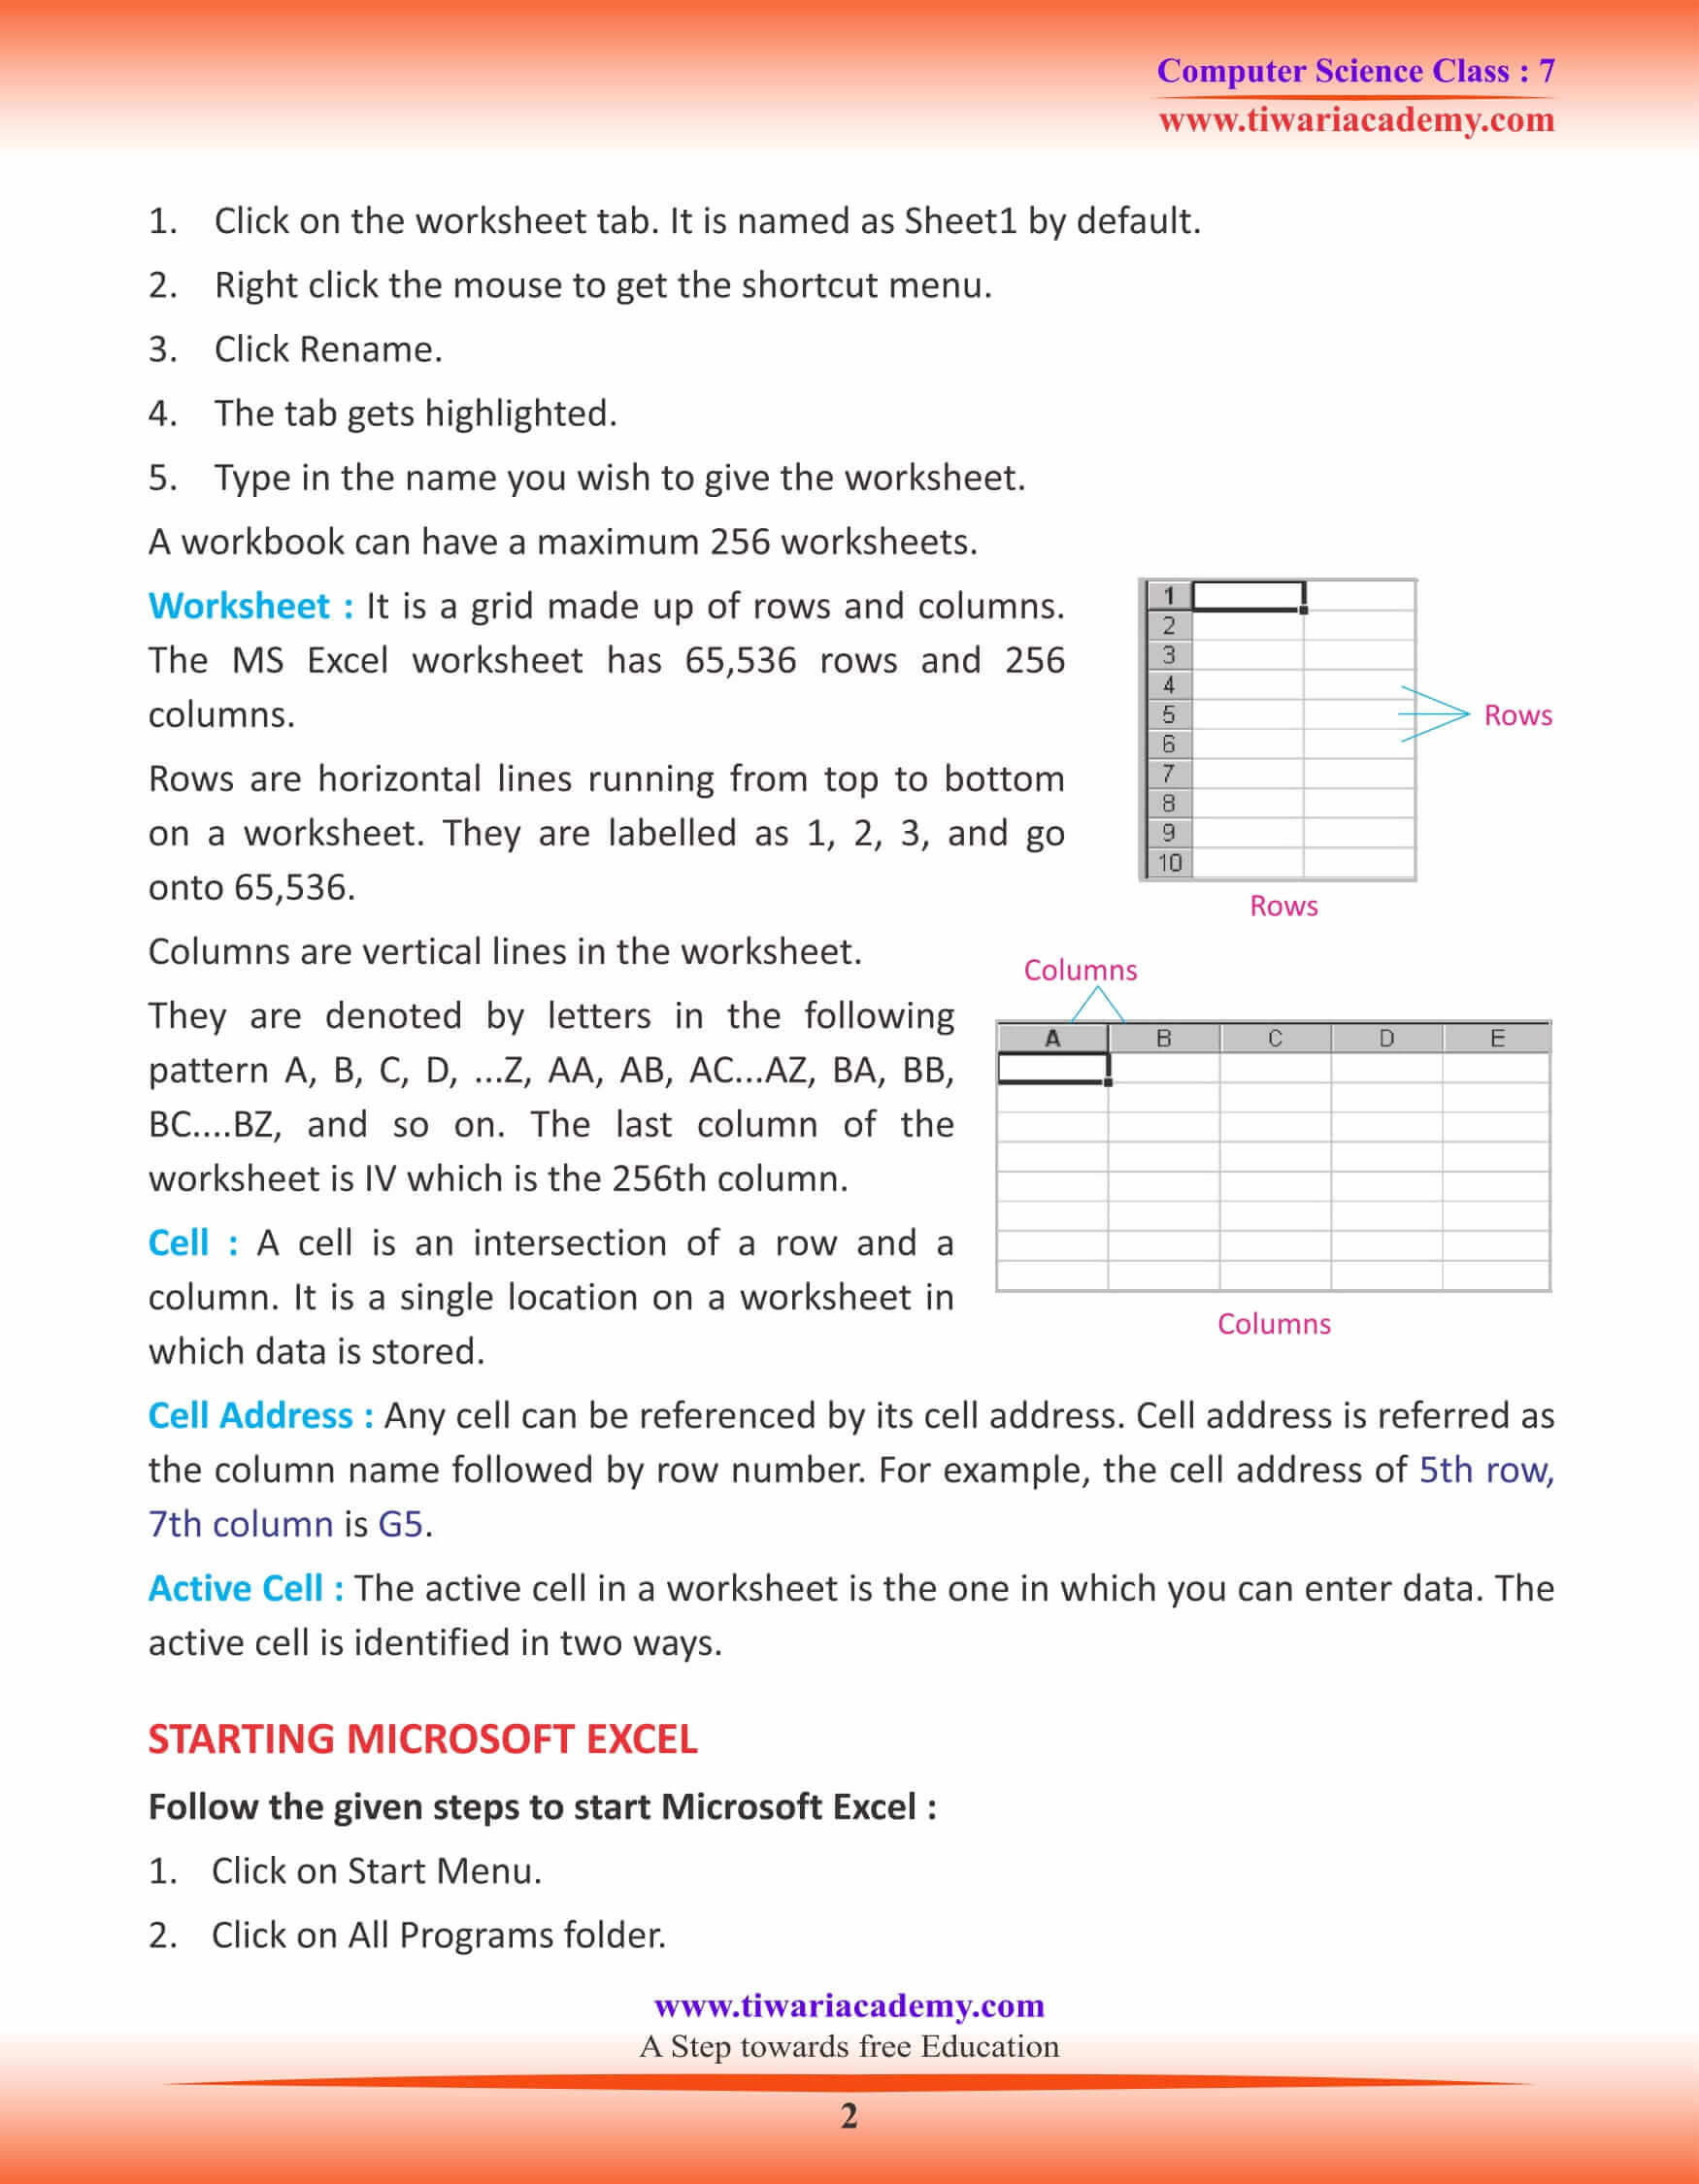 Class 7 Computer Science Chapter 4 Basics of Microsoft Excel